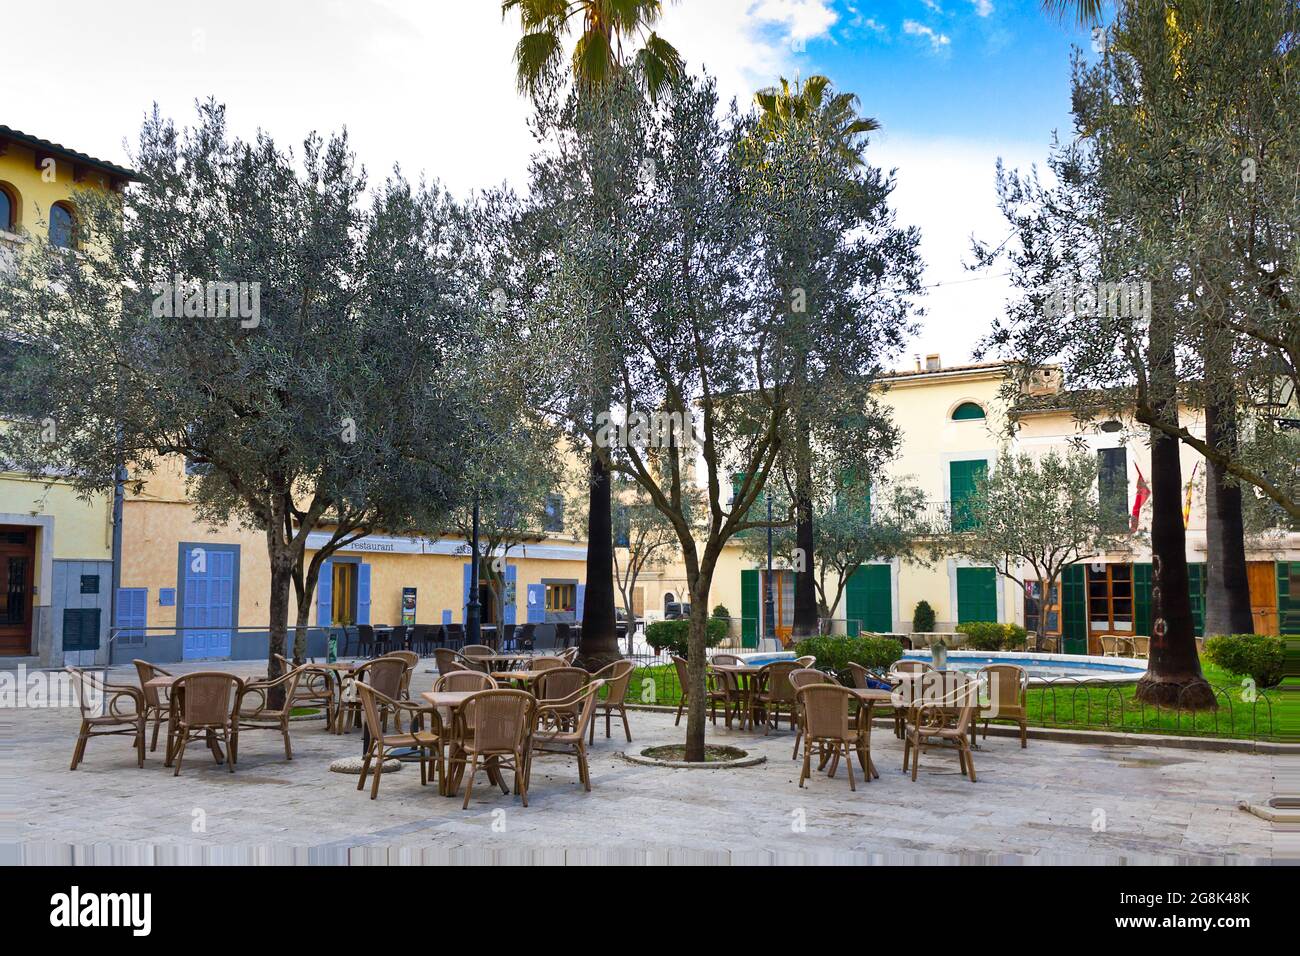 Idyllic square with a water fountain in the town of Petra in the evening, central Majorca or Mallorca, Balearic Islands, Mediterranean Sea. Stock Photo